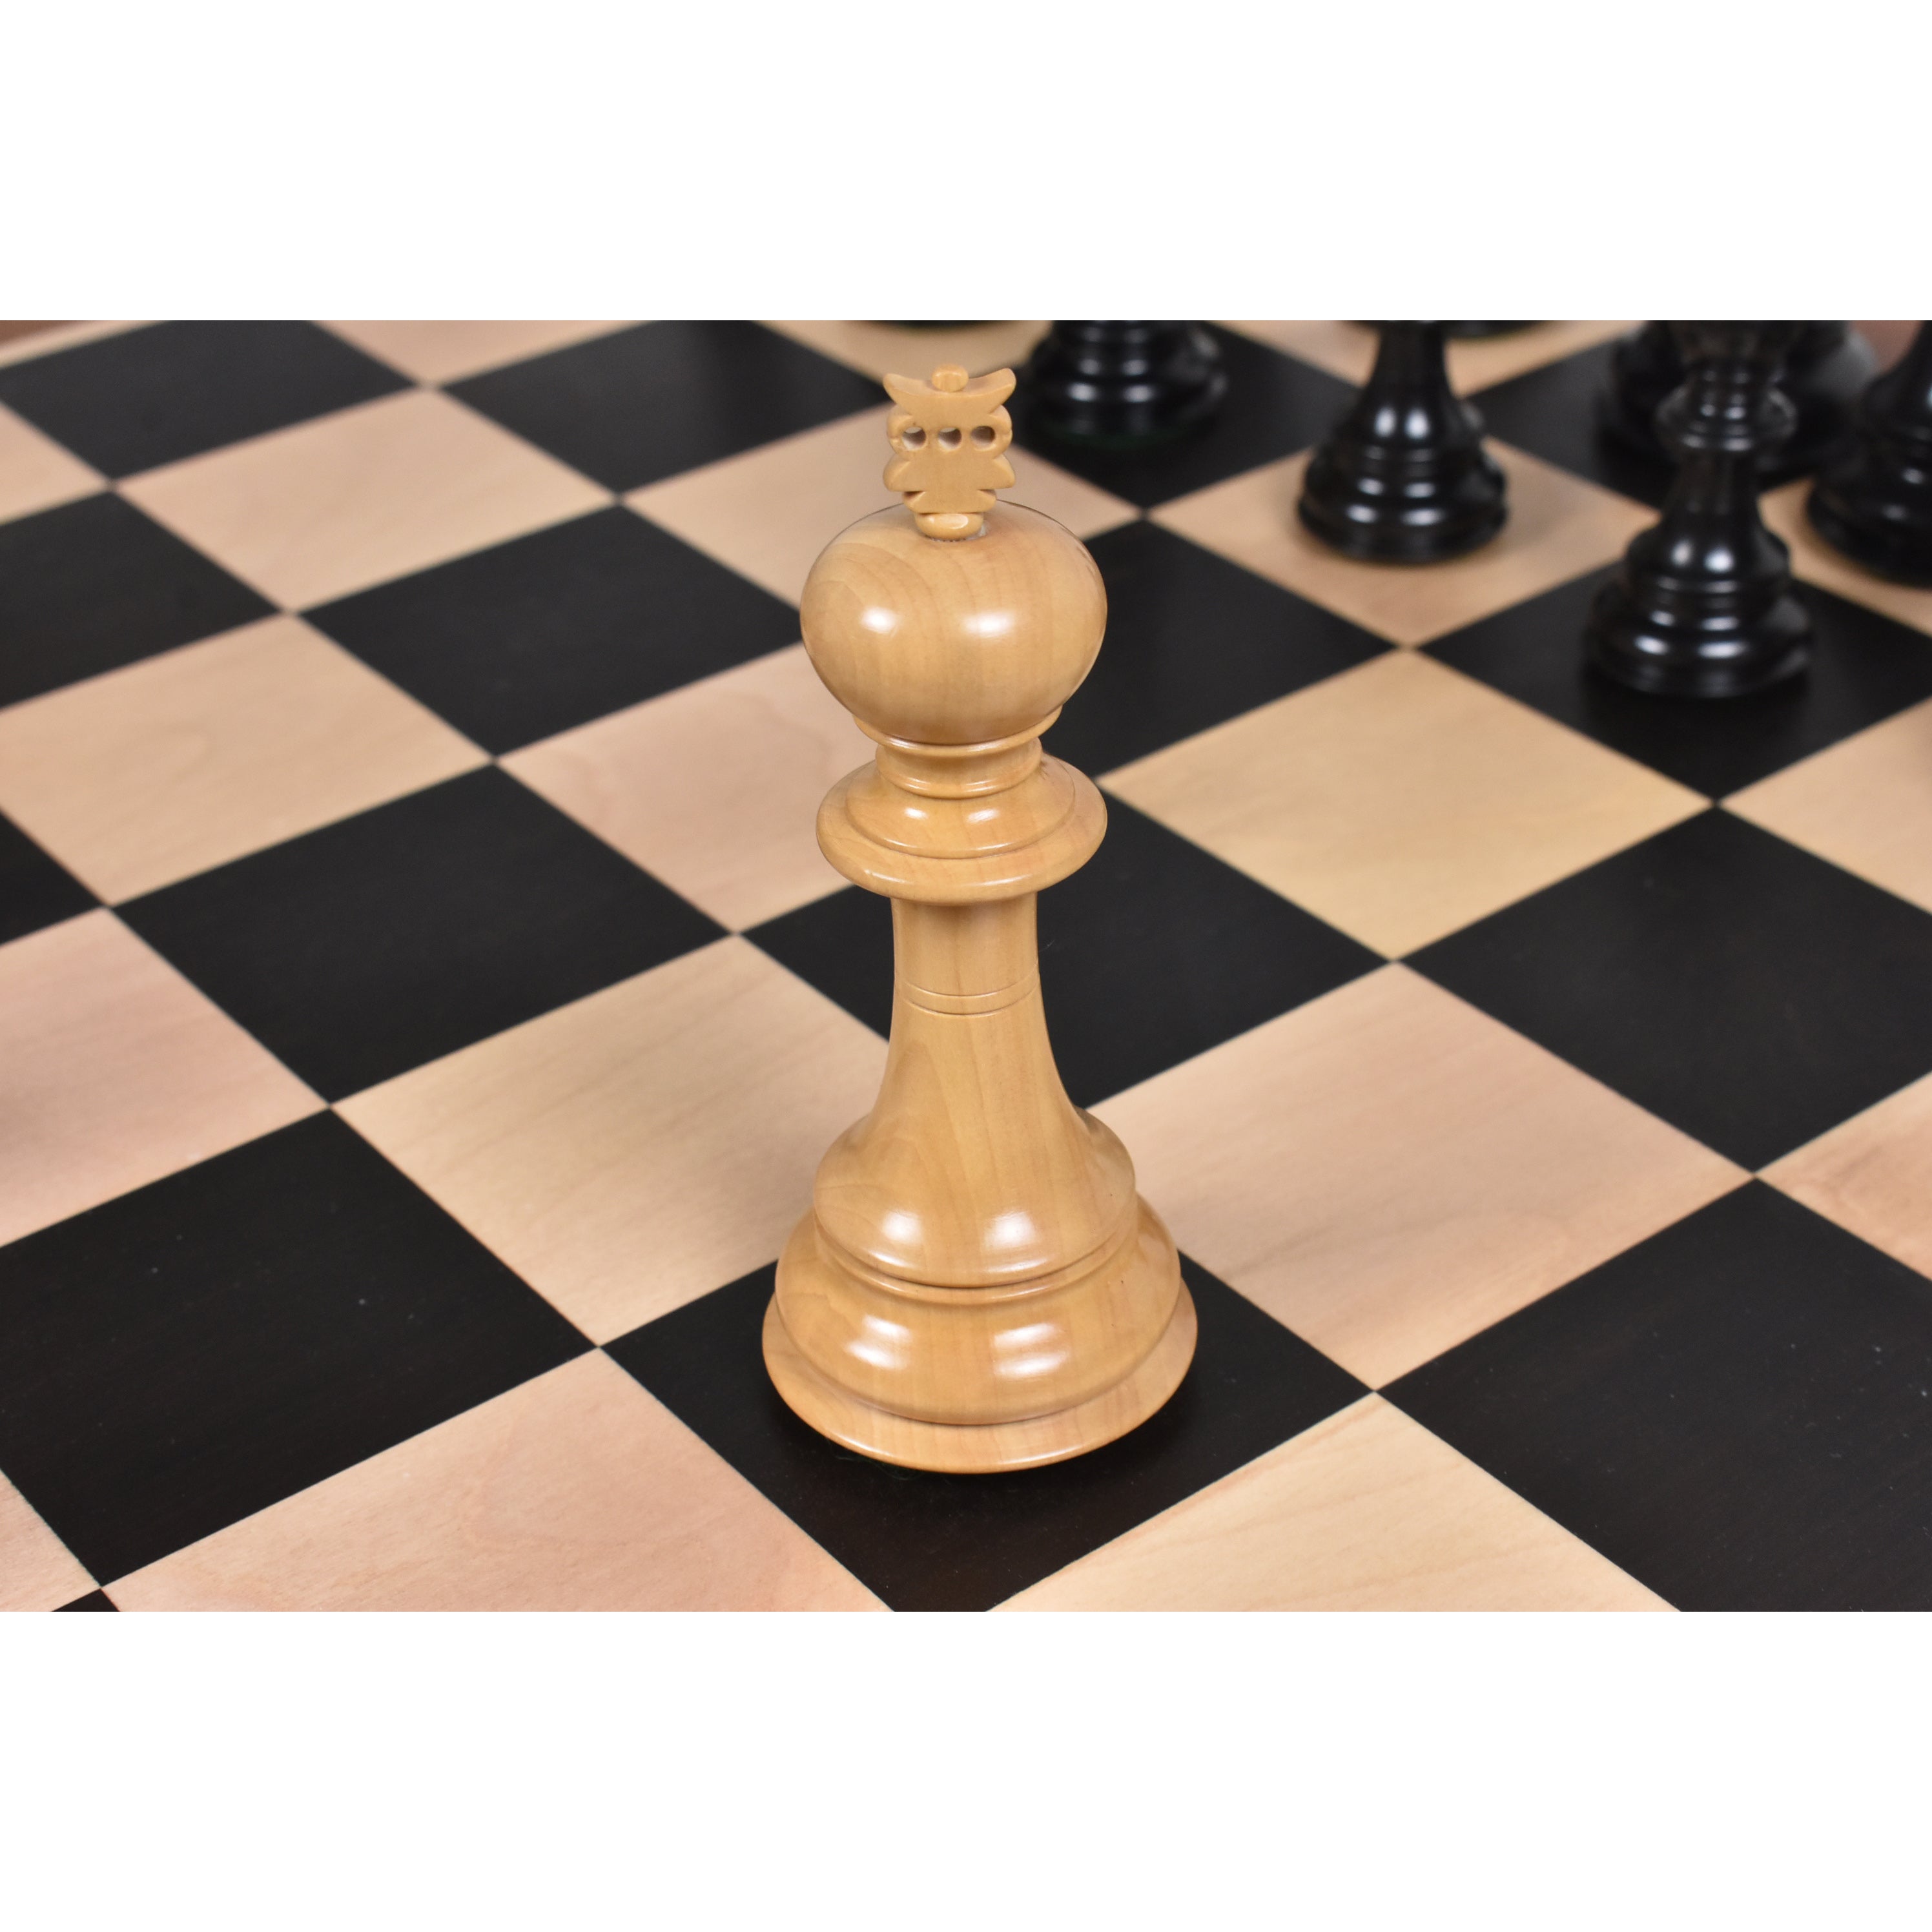 4.6" Prestige Luxury Staunton Chess Set- Chess Pieces Only - Natural Ebony Wood - Triple Weighted